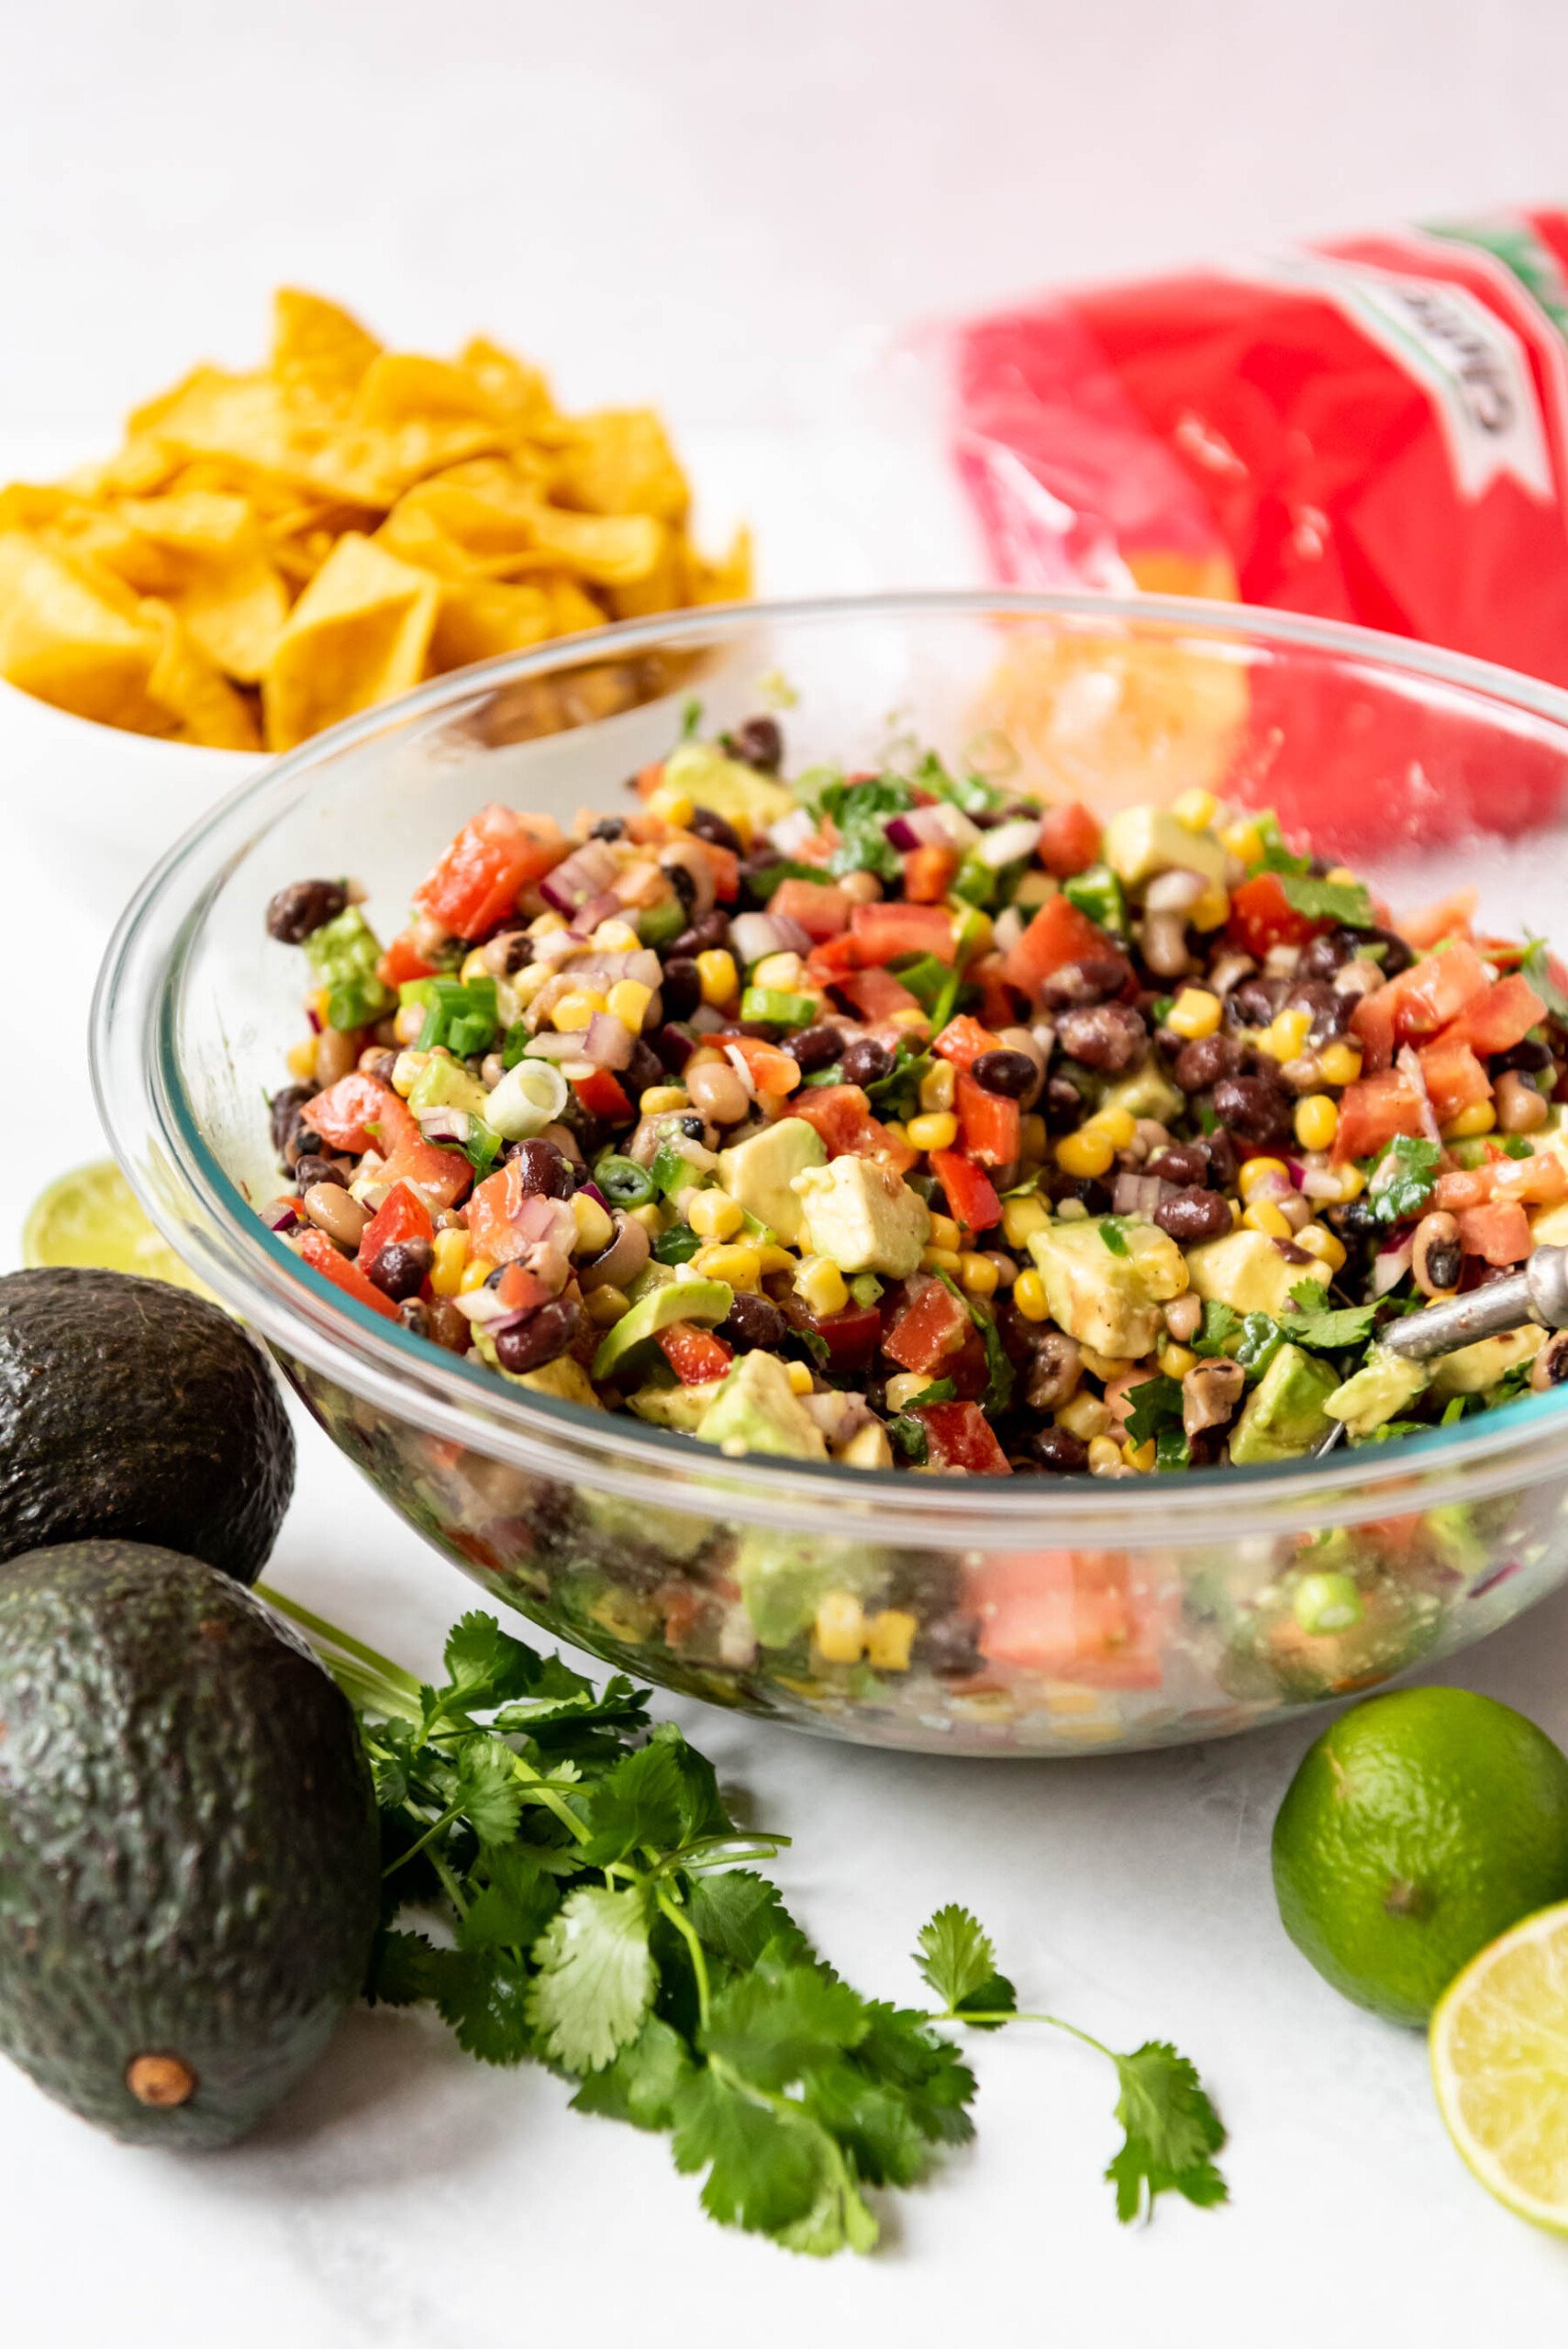 A large glass bowl filled with Texas cowboy caviar next to avocados, limes, and corn chips.